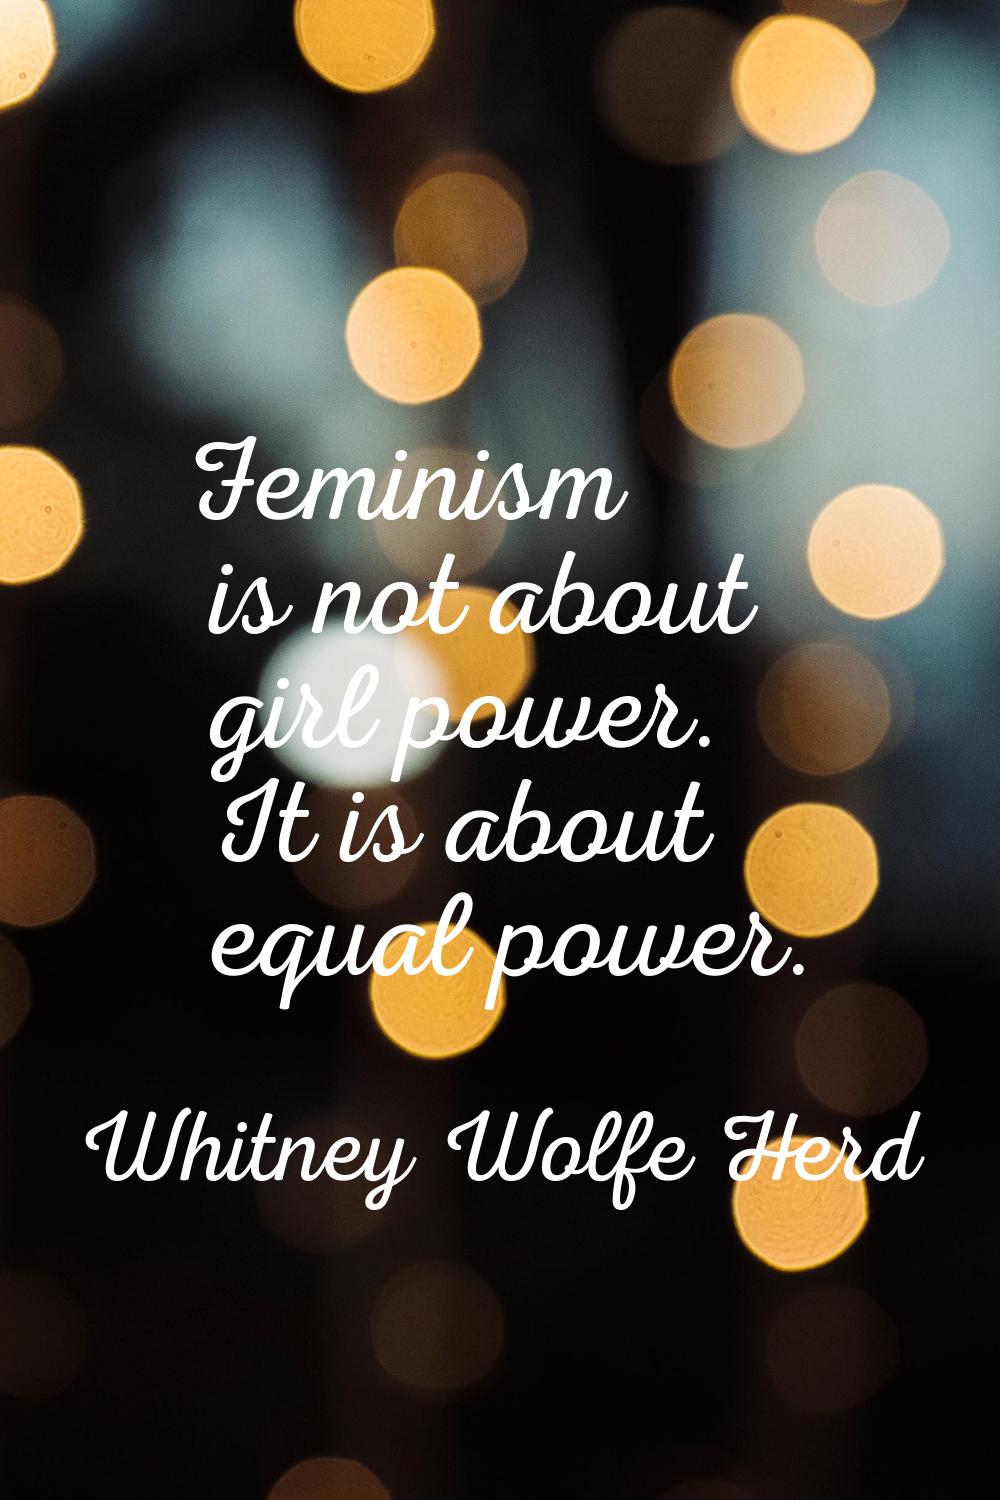 Feminism is not about girl power. It is about equal power.